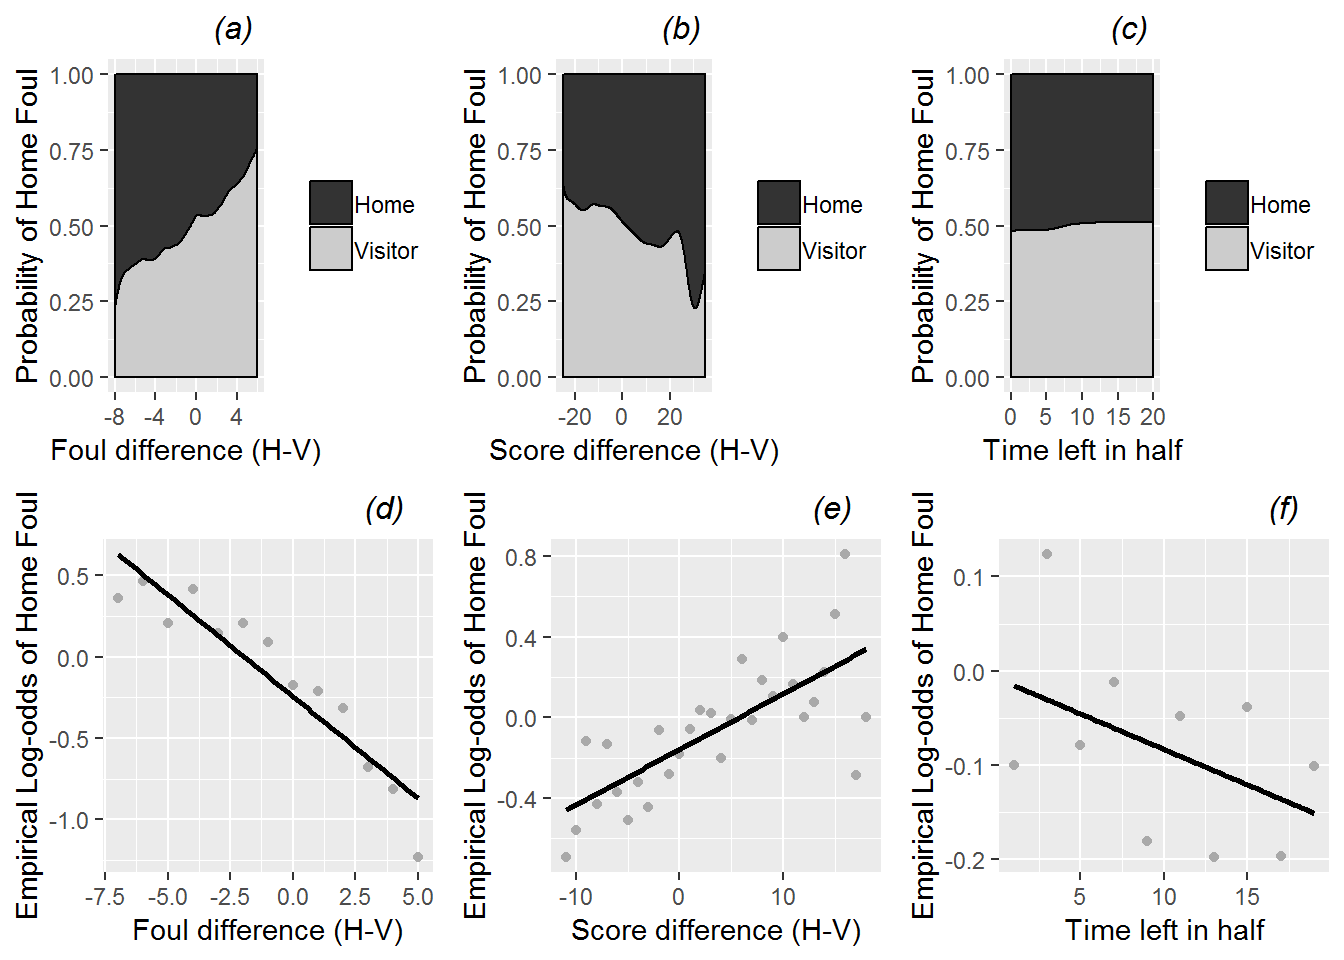 Conditional density and empirical logit plots of the binary model response (foul called on home or visitor) vs. the three continuous Level One covariates (foul differential, score differential, and time remaining).  The dark shading in a conditional density plot shows the proportion of fouls called on the home team for a fixed value of (a) foul differential, (b) score differential, and (c) time remaining.  In empirical logit plots, estimated log odds of a home team foul are calculated for each distinct foul (d) and score (e) differential, except for differentials at the high and low extremes with insufficient data; for time (f), estimated log odds are calculated for two-minute time intervals and plotted against the midpoints of those interval.